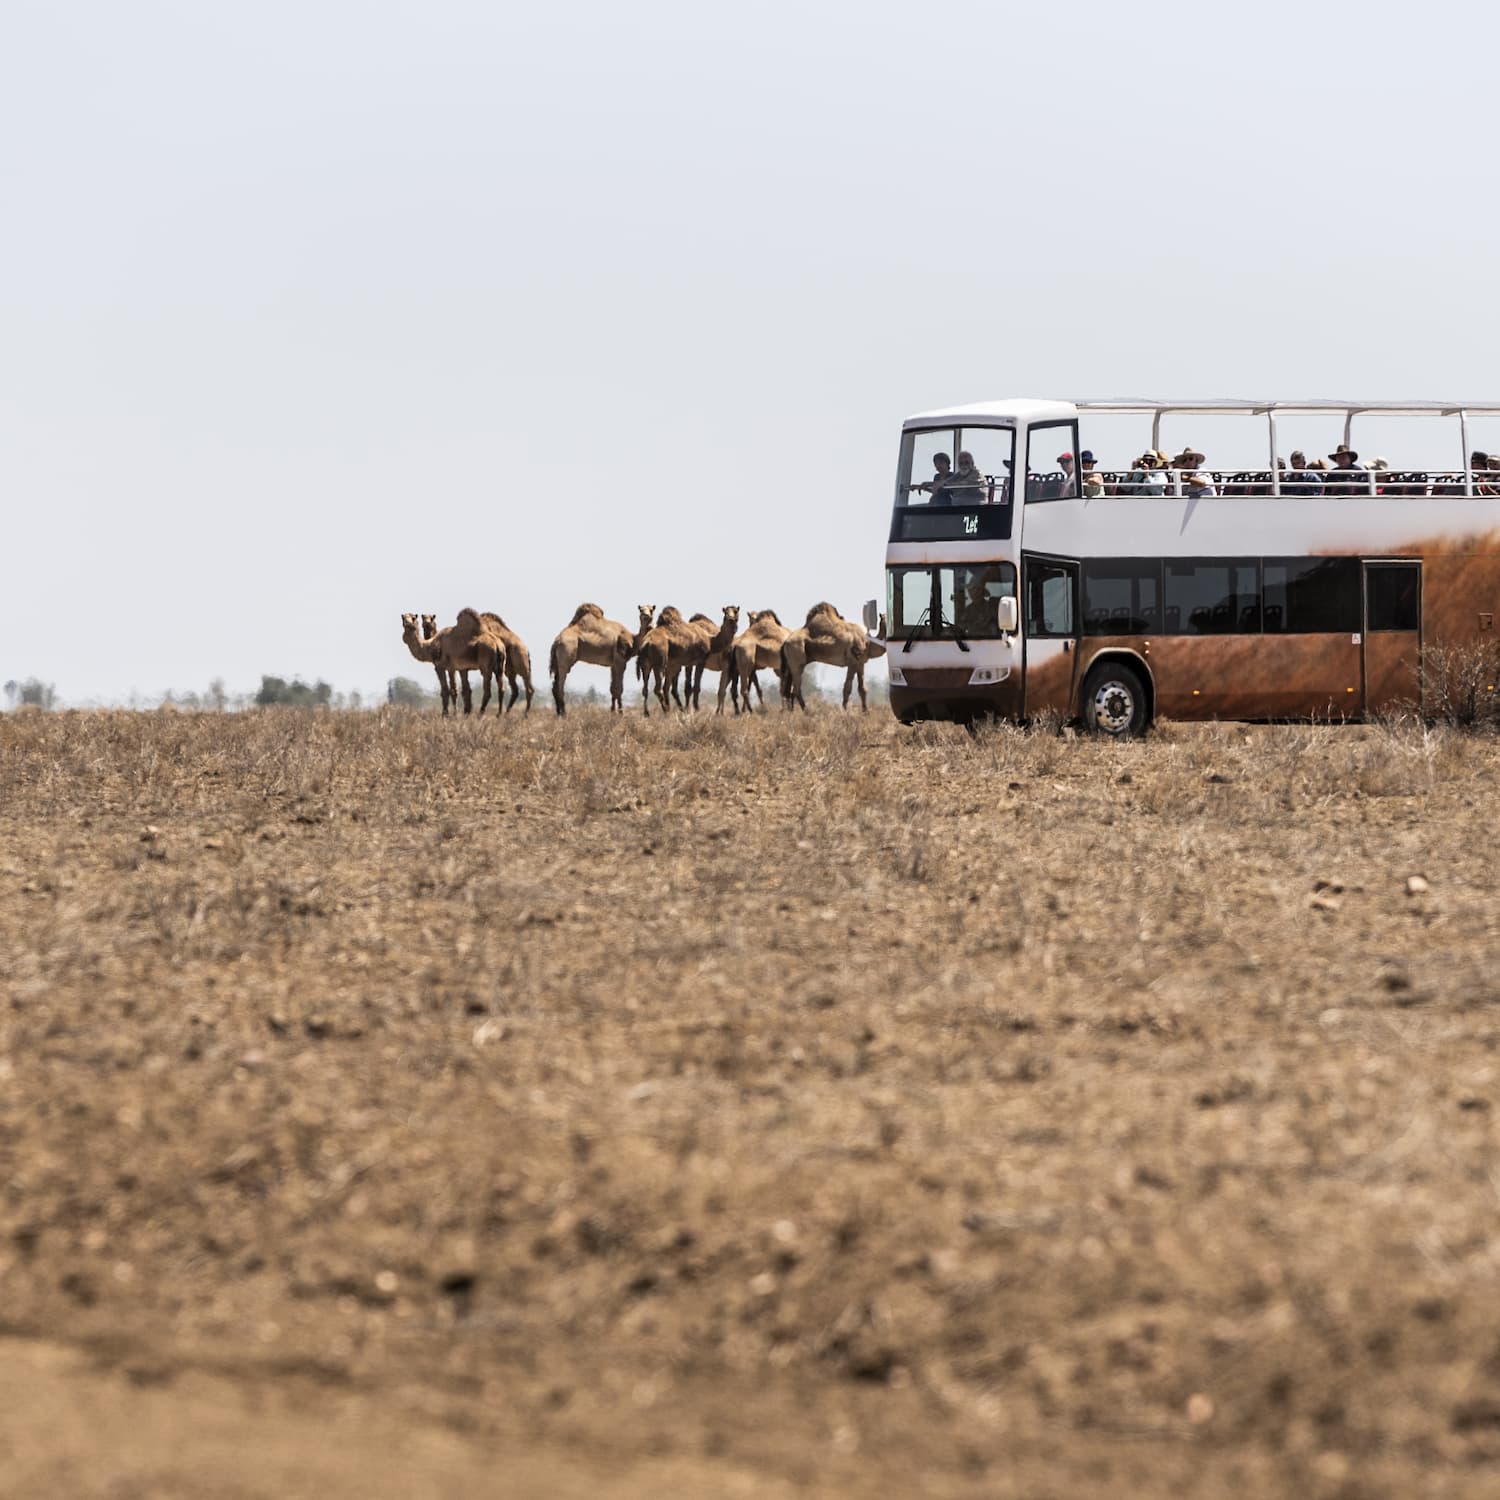 Camels standing beside the Outback Pioneers double-decker coach in the outback landscape